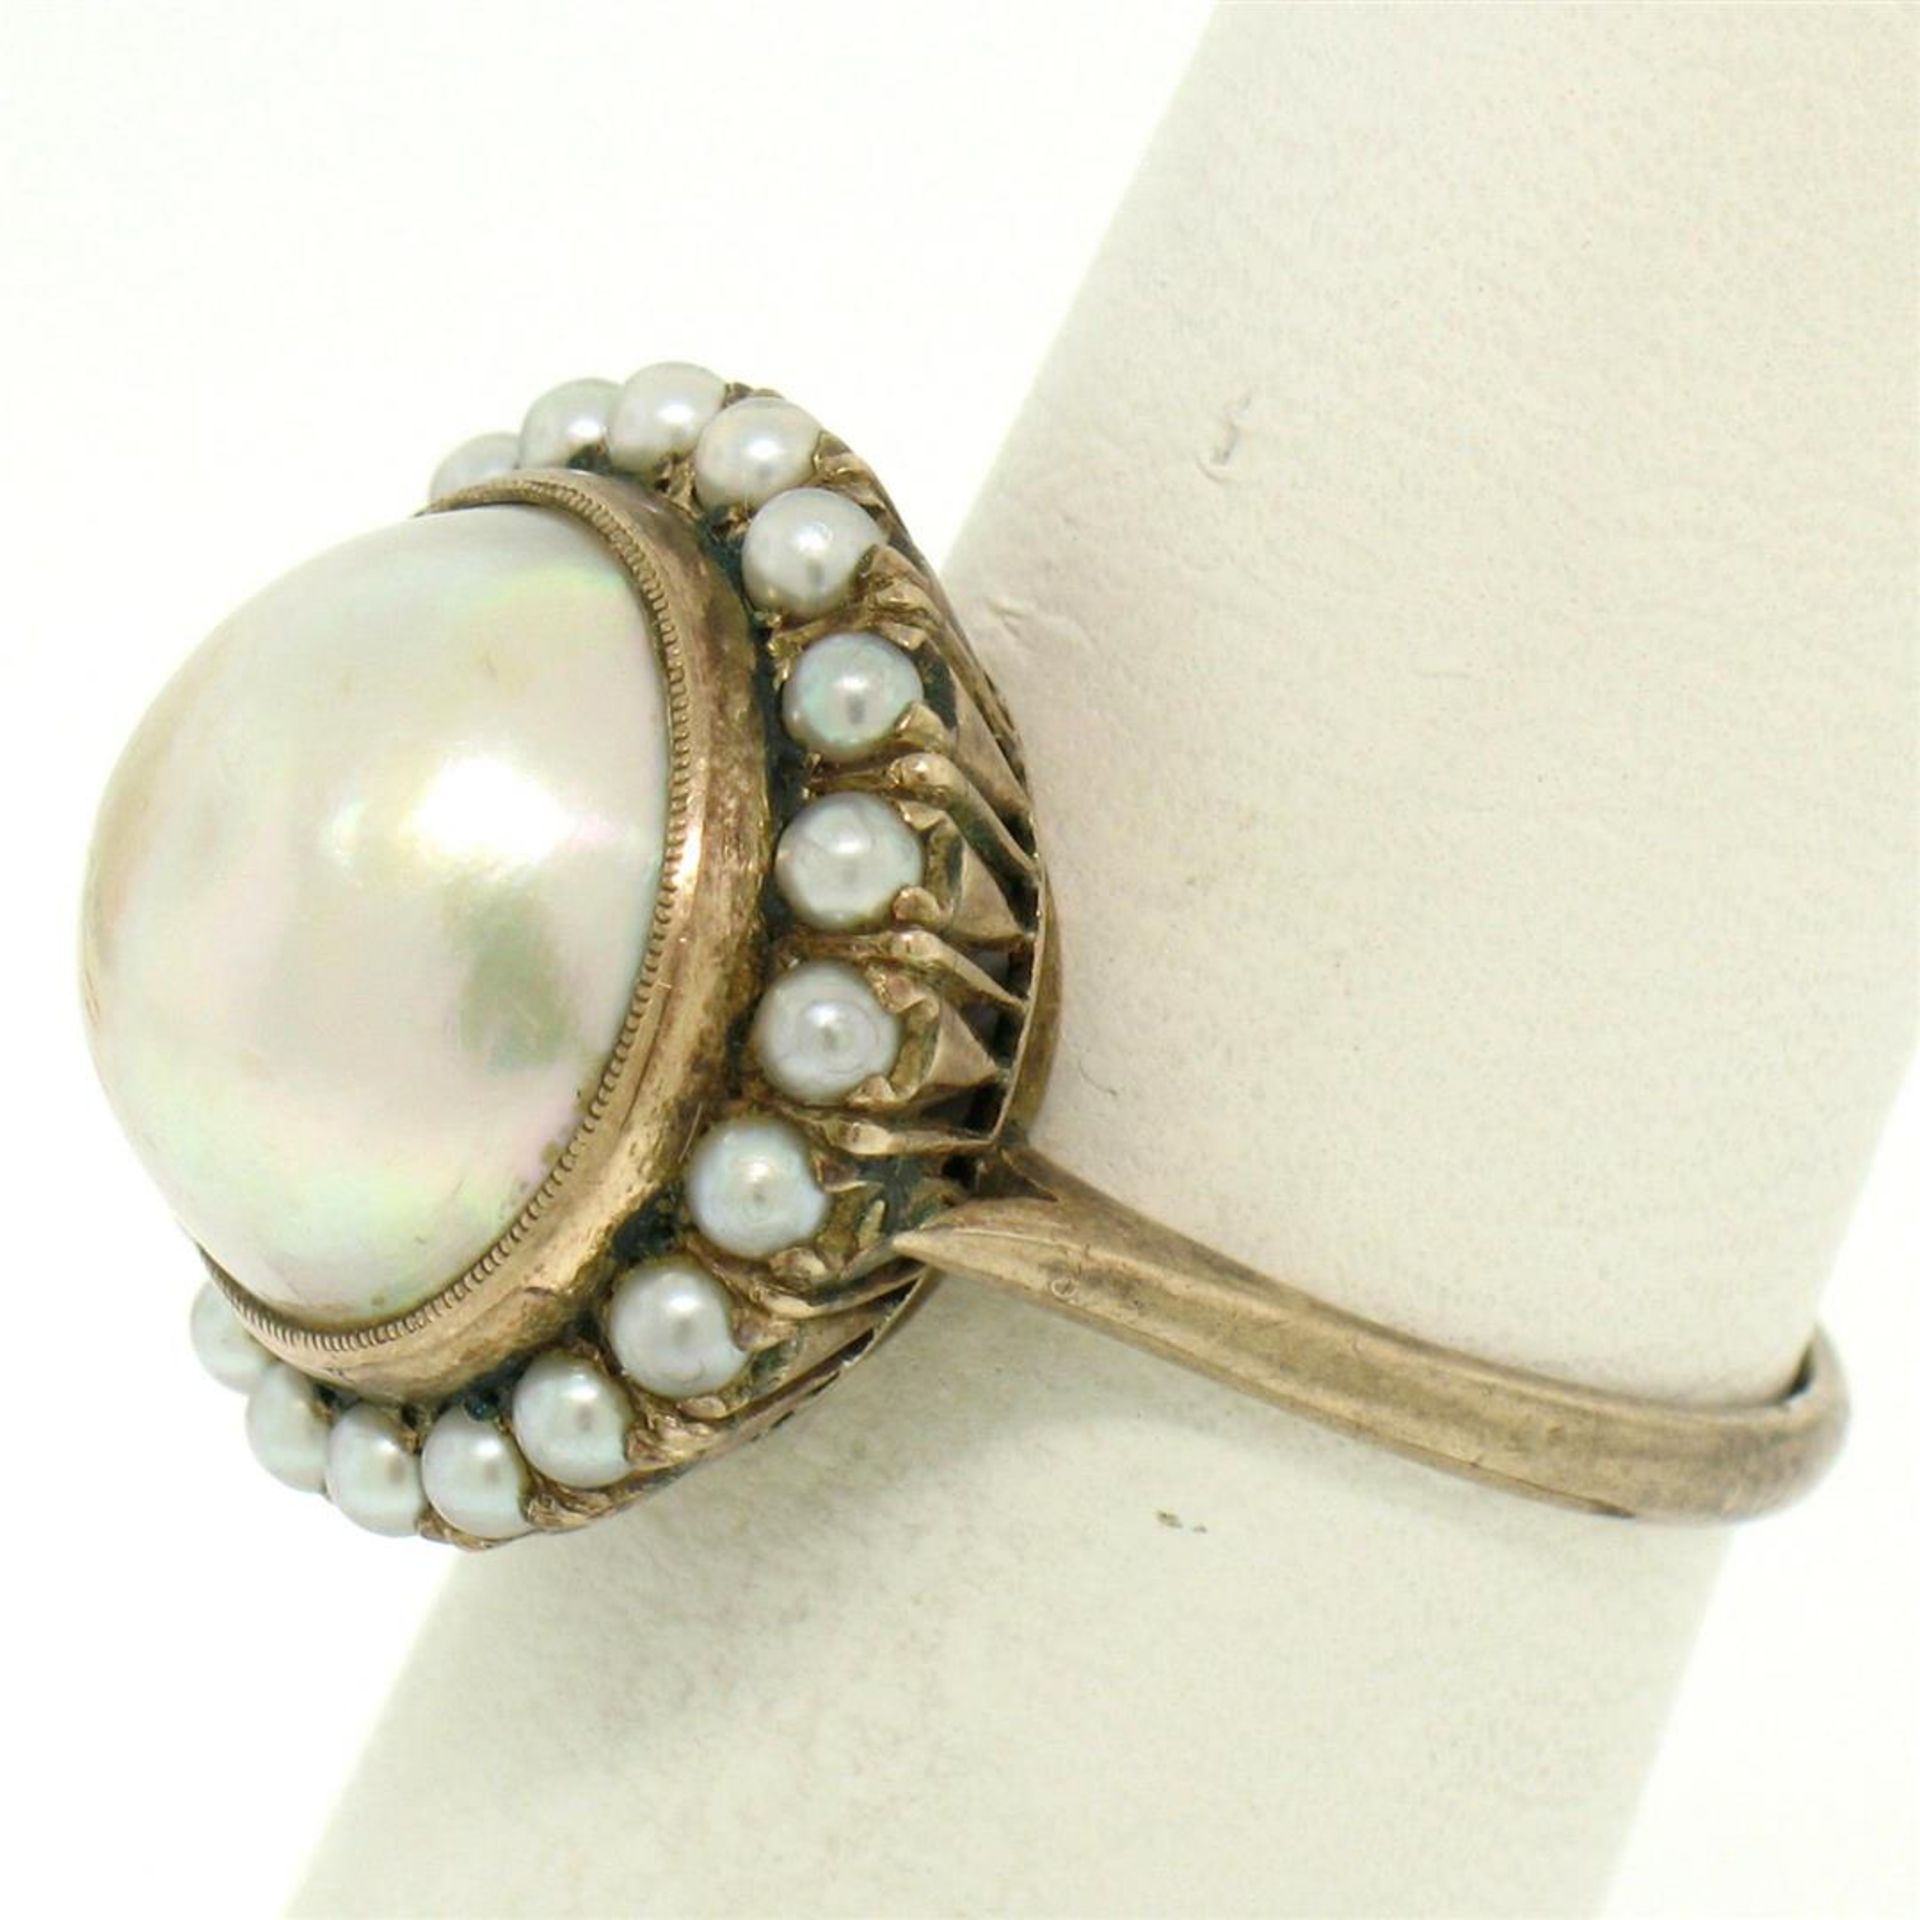 Antique Victorian 10K Rose Gold Bezel Mabe Prong Seed Pearl Ring & Earrings Set - Image 8 of 9